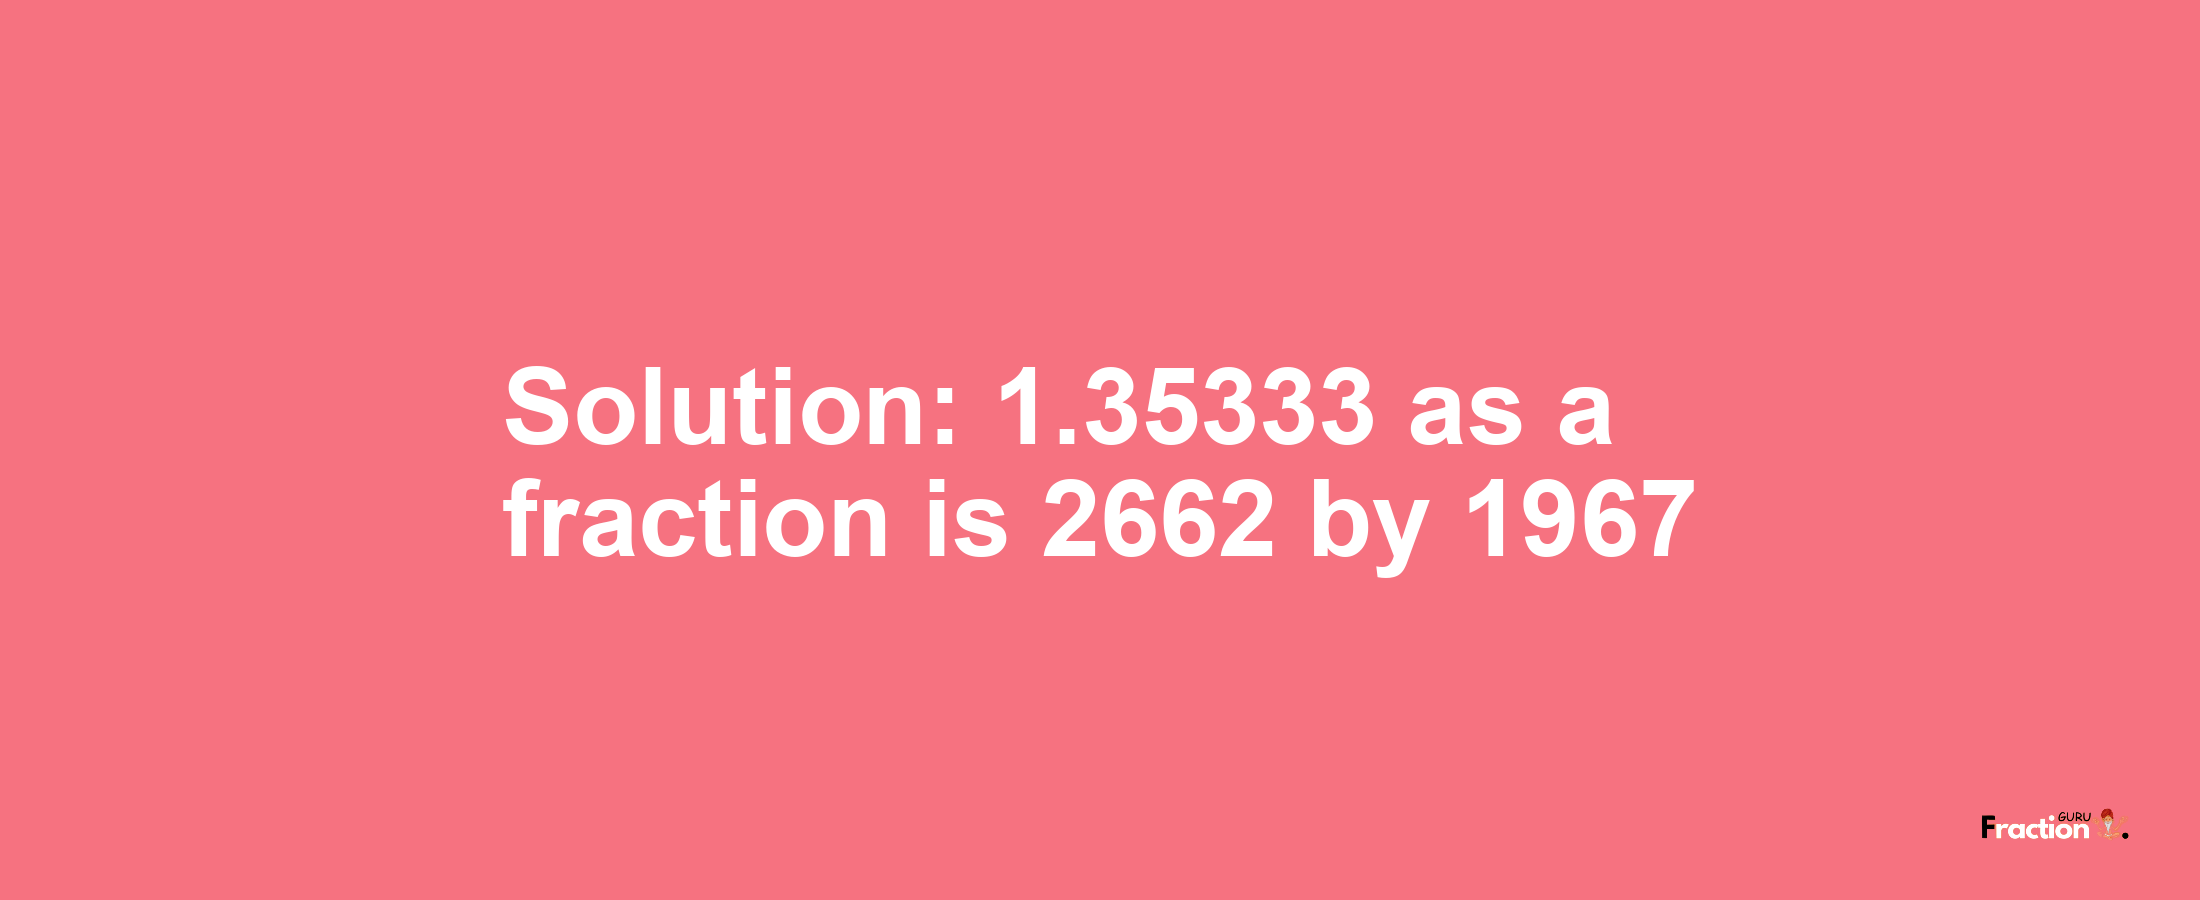 Solution:1.35333 as a fraction is 2662/1967